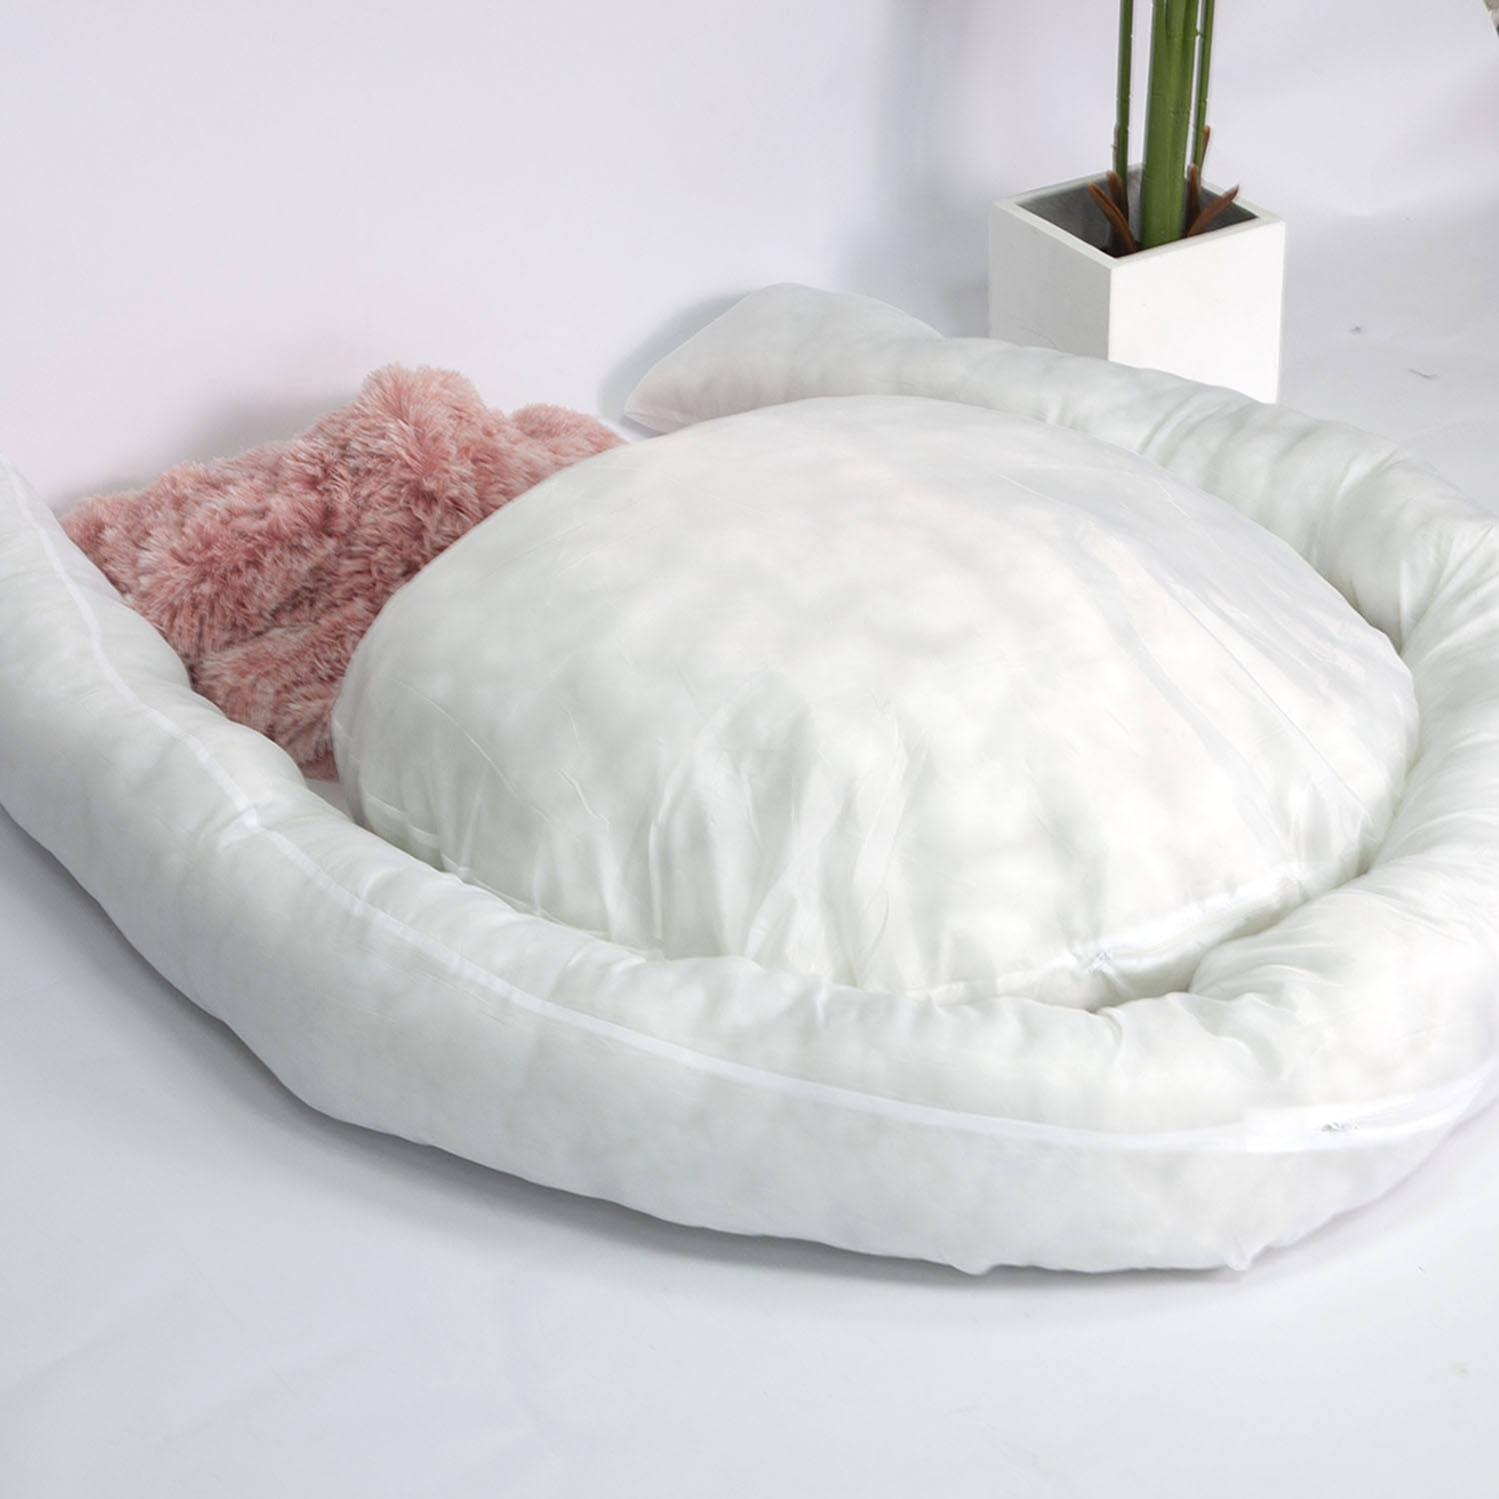 Customized Washable Fluffy Dog Bed Pink Donut Cat And Dog Cushion Bed 20in Pet Bed Fo